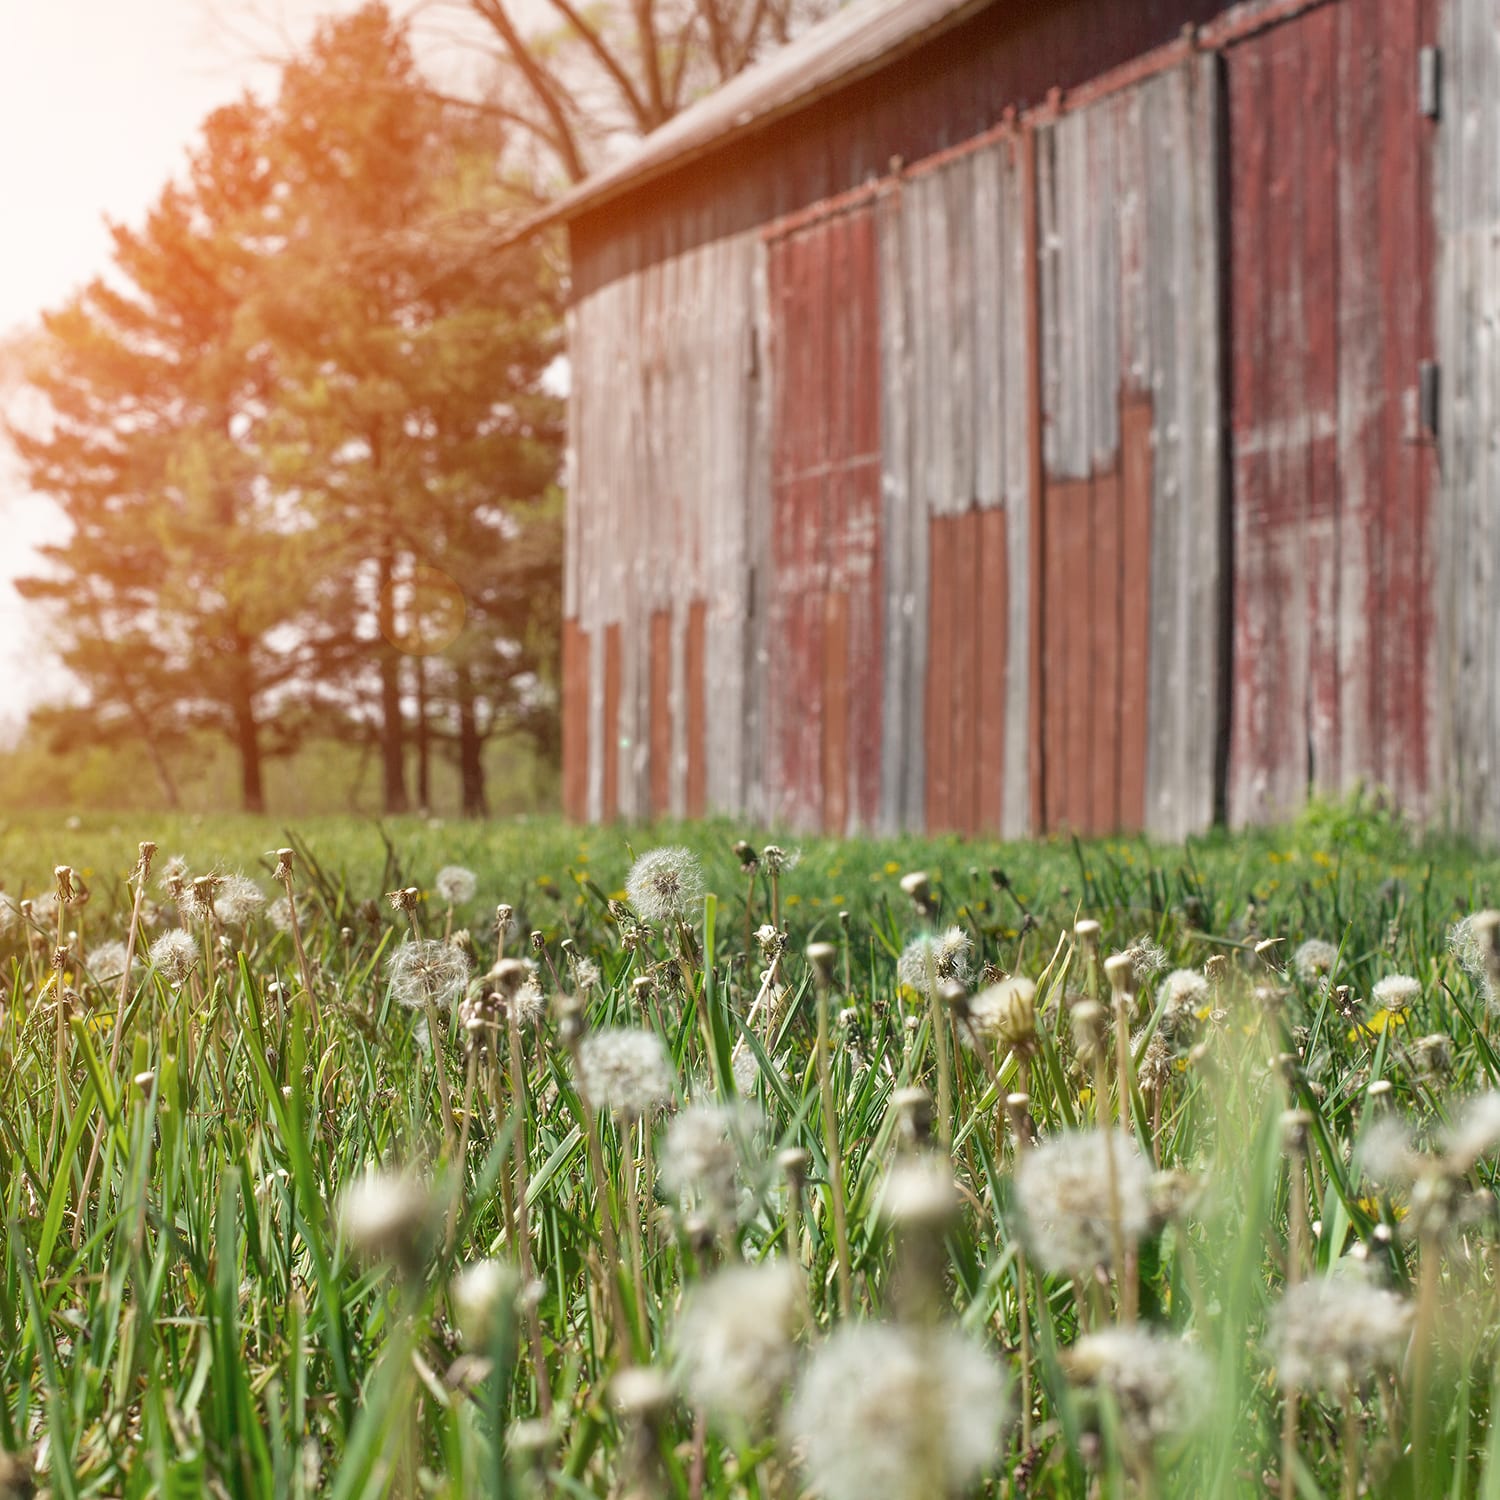 Historic,Old,Farmhouse,And,Rustic,Faded,Barn,With,Dandelion,Seeds